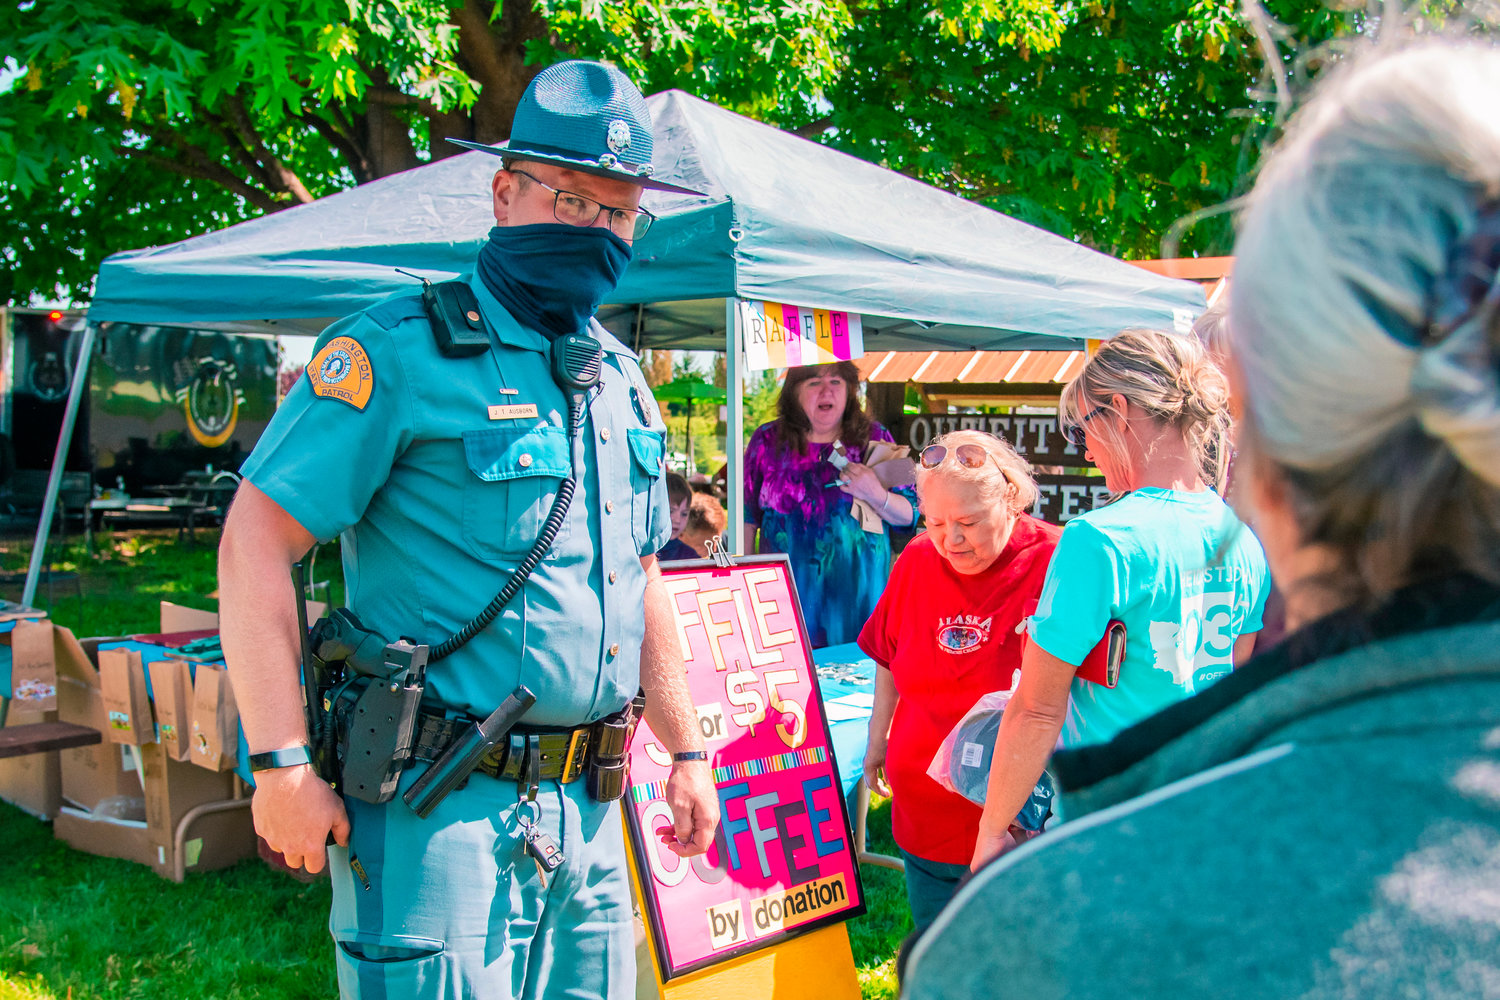 J.T. Ausborn with the Washington State Patrol mingles with attendees near a raffle table during a “Back The Blue” event on Saturday outside the Adna Burger Bar.